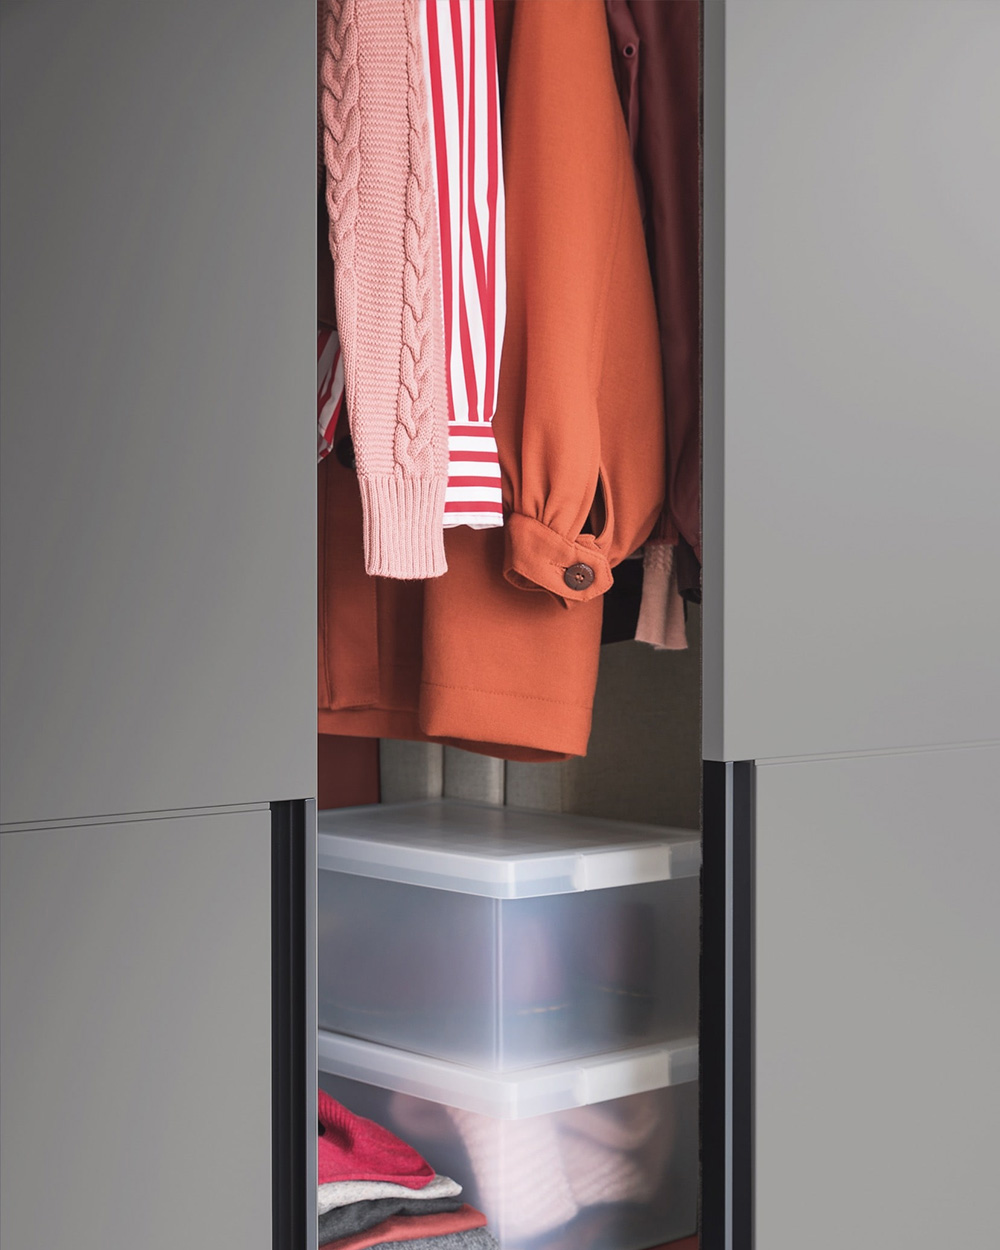 A balanced and minimal designed sliding wardrobe, designed in Italy, fitted to your home by Krieder.